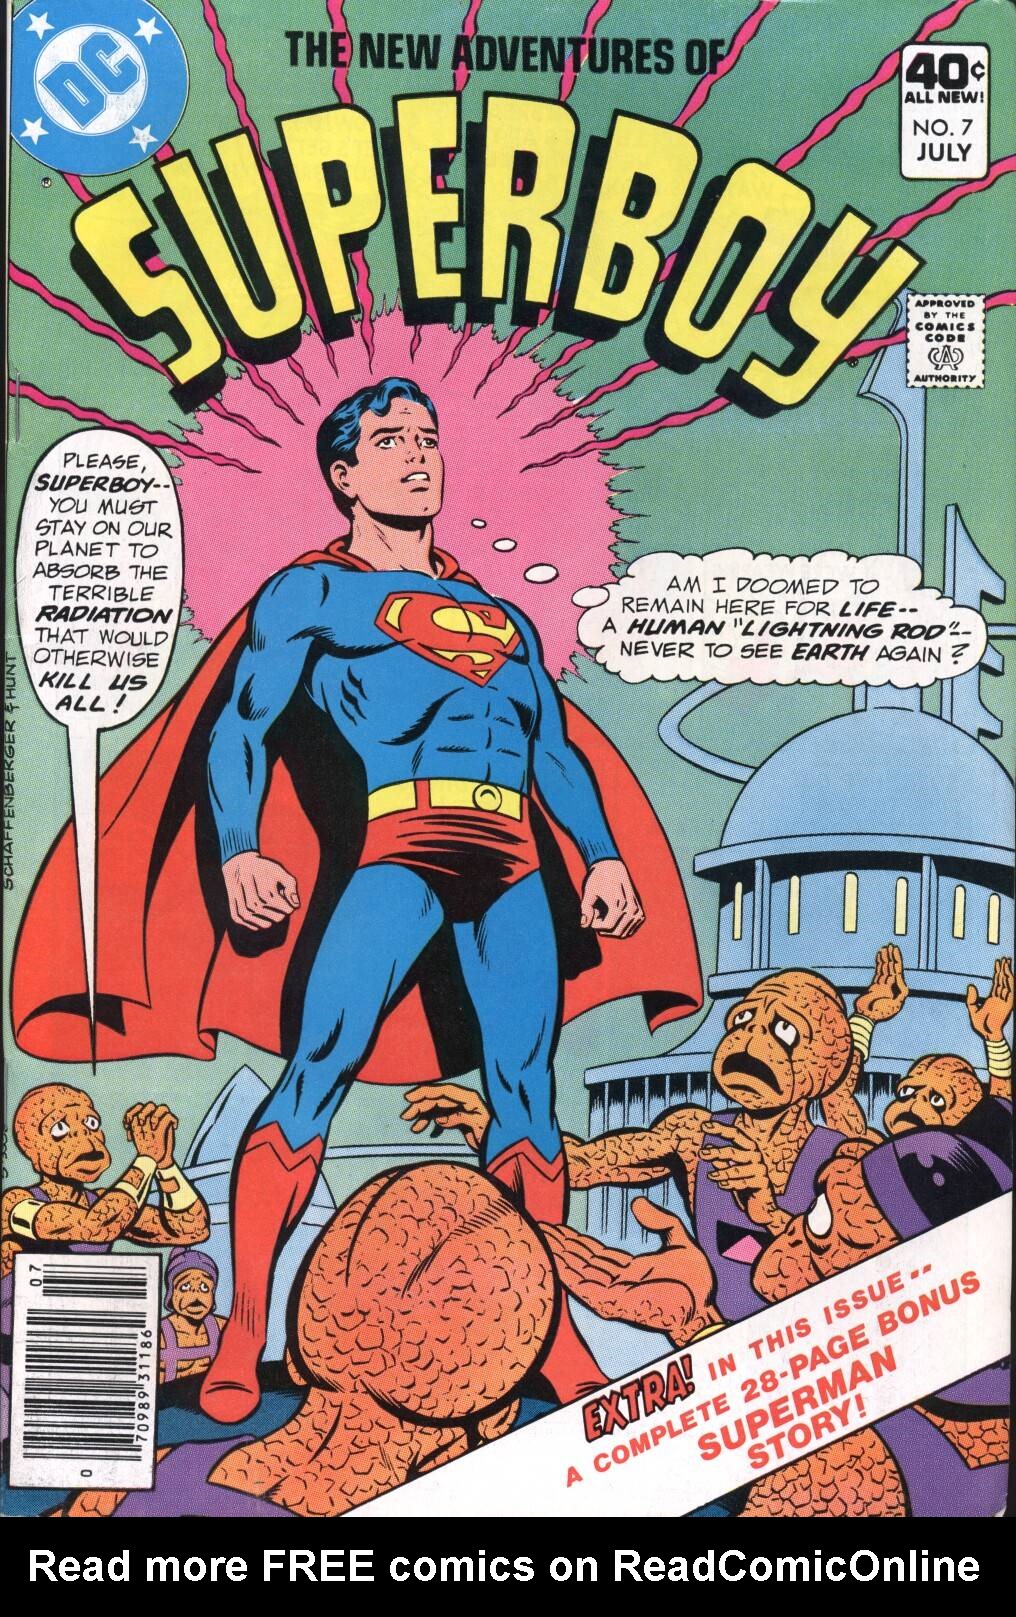 Read online The New Adventures of Superboy comic -  Issue #7 - 1